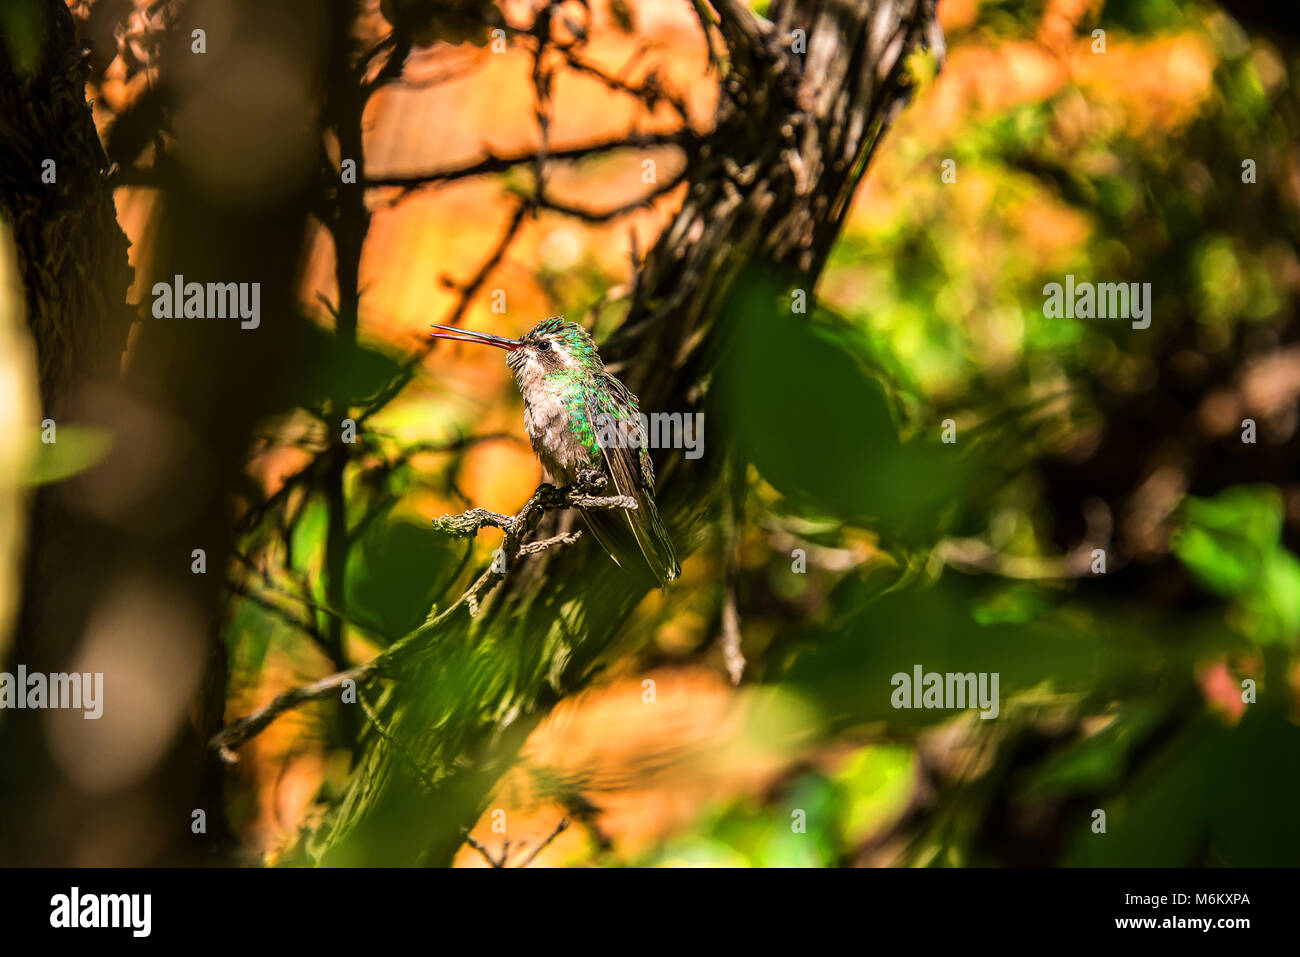 A hummingbird resting on a branch Stock Photo